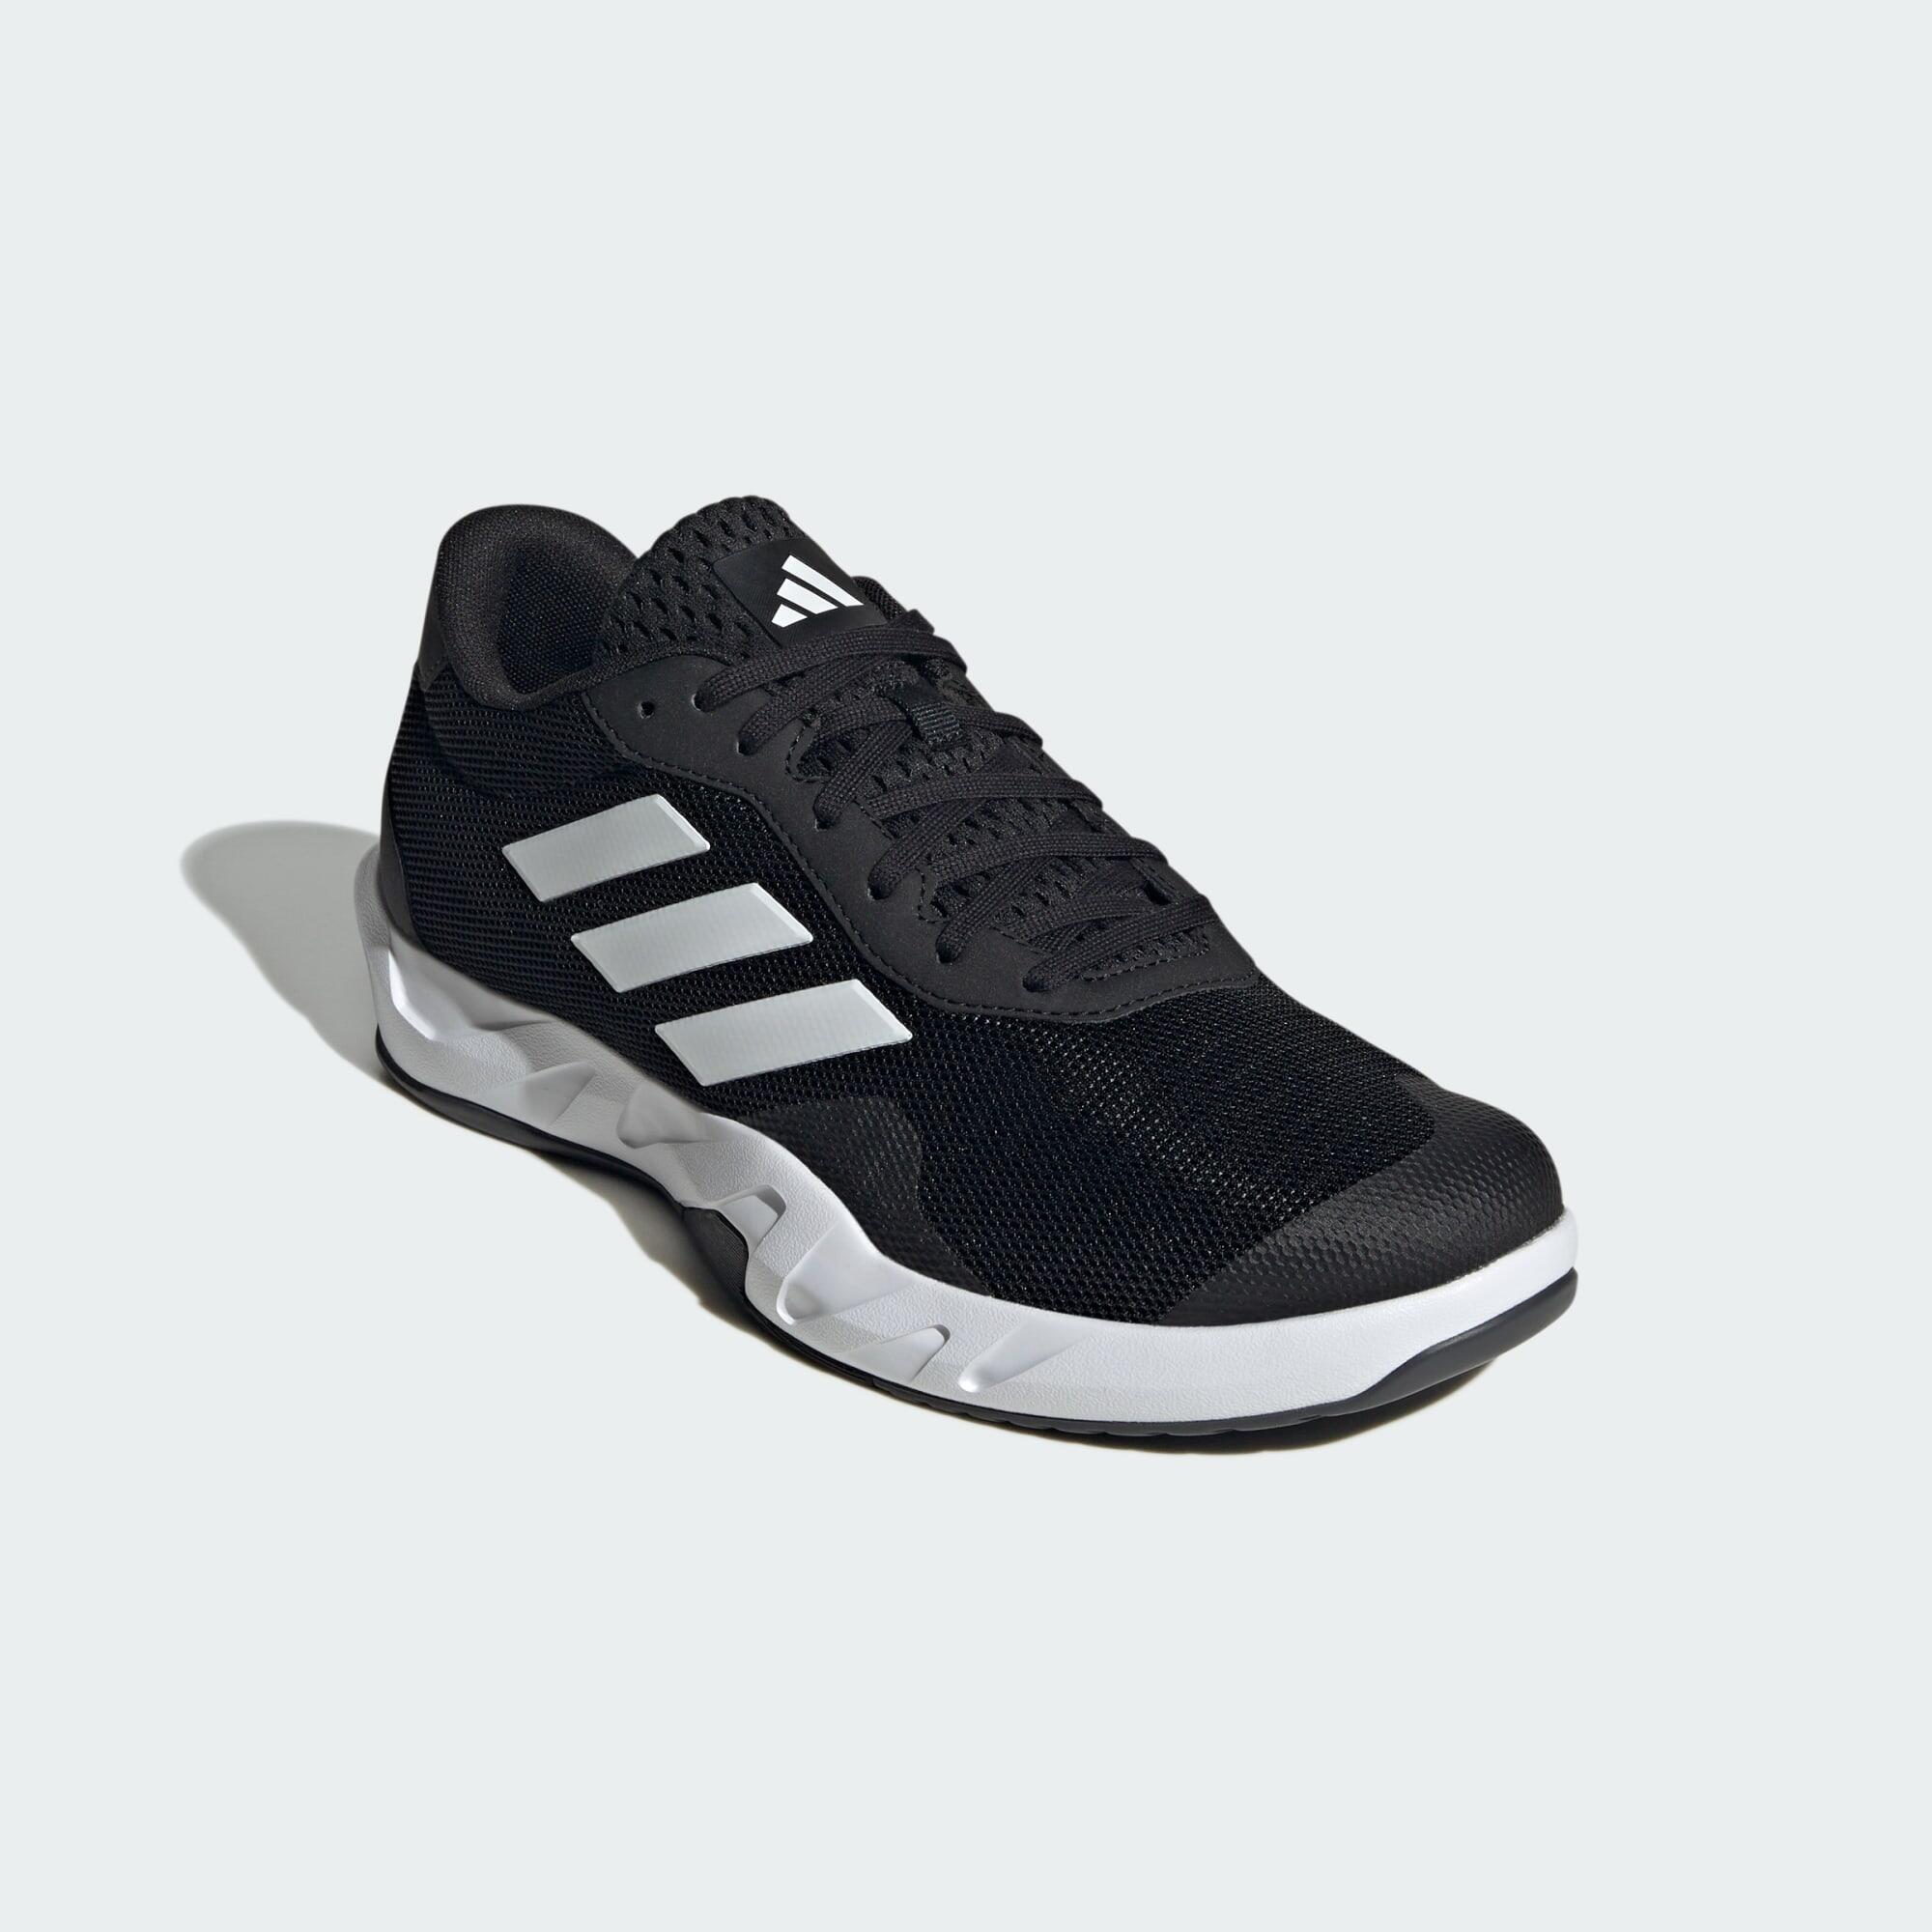 Amplimove Trainer Shoes 5/7